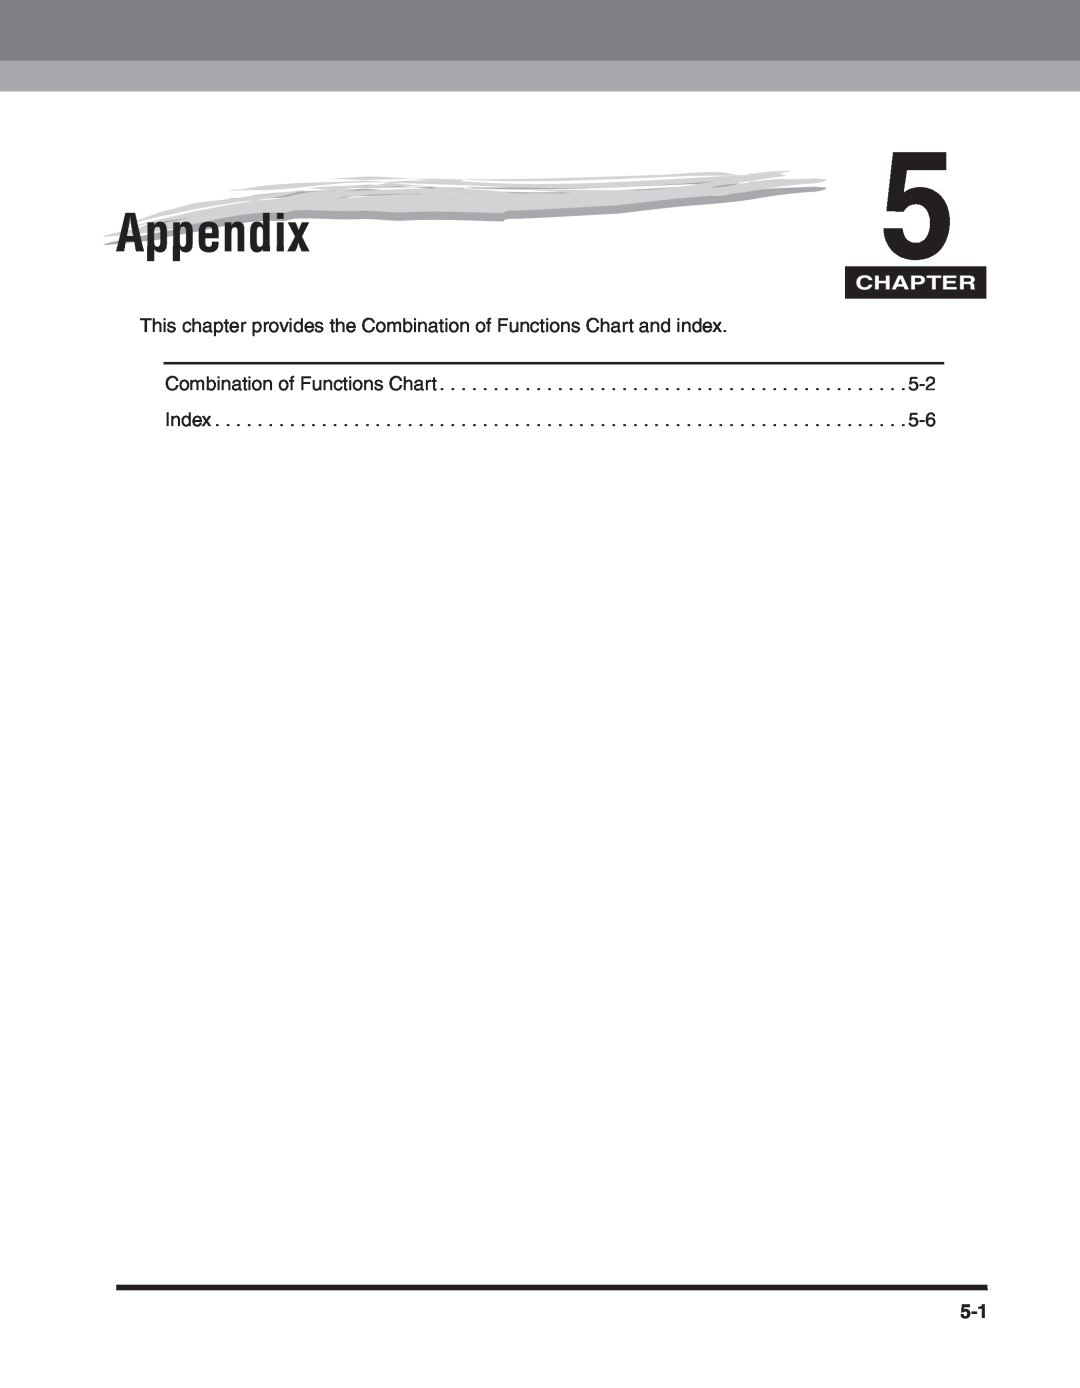 Canon 2300 manual Appendix, Chapter, This chapter provides the Combination of Functions Chart and index 